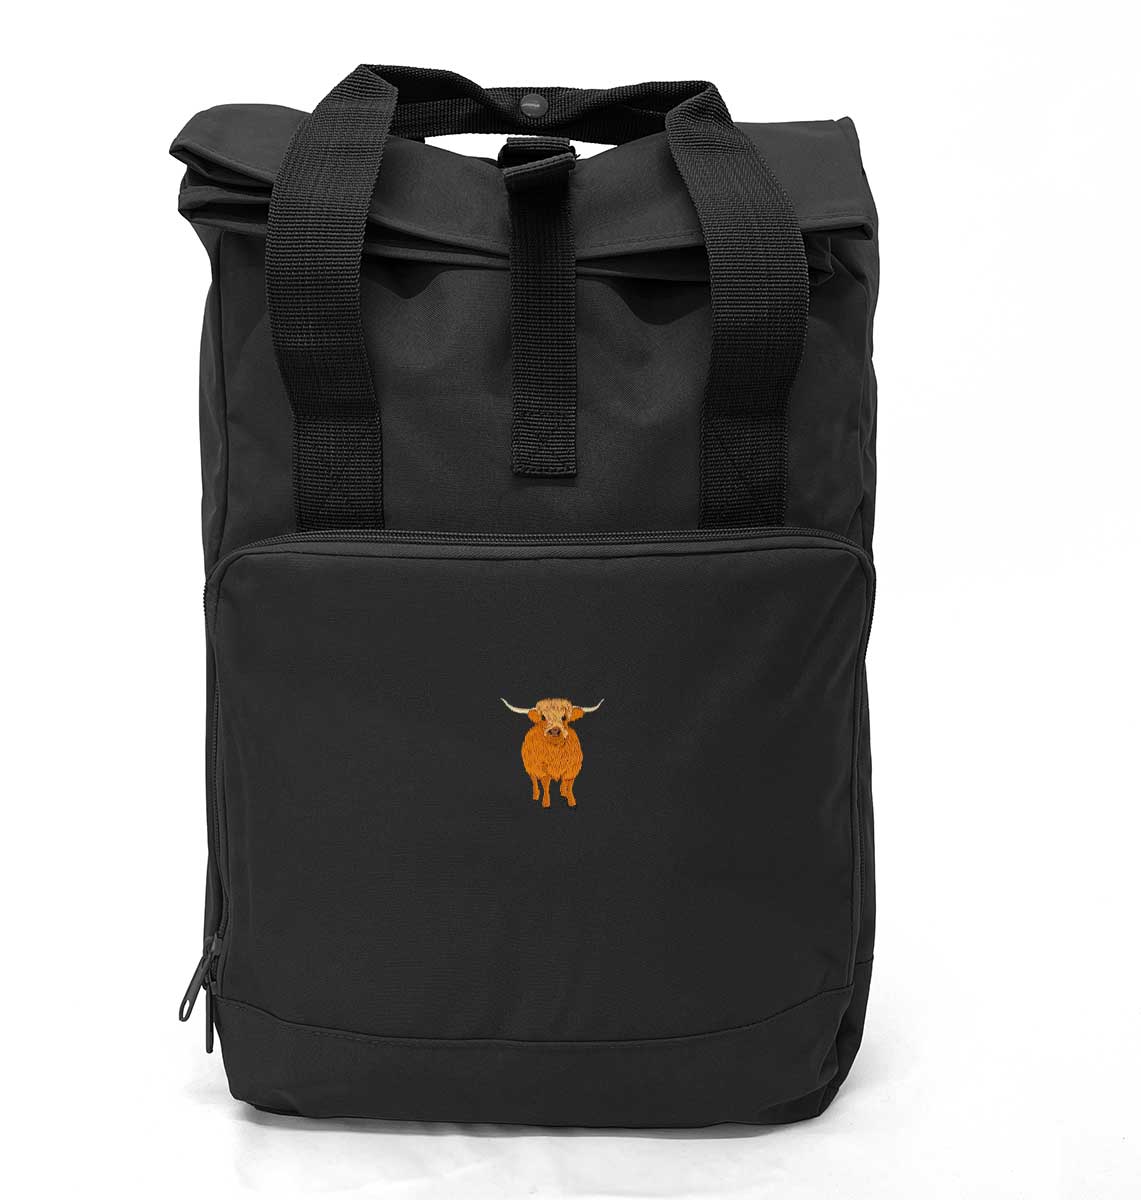 Highland Cow Large Roll-top Laptop Recycled Backpack - Blue Panda